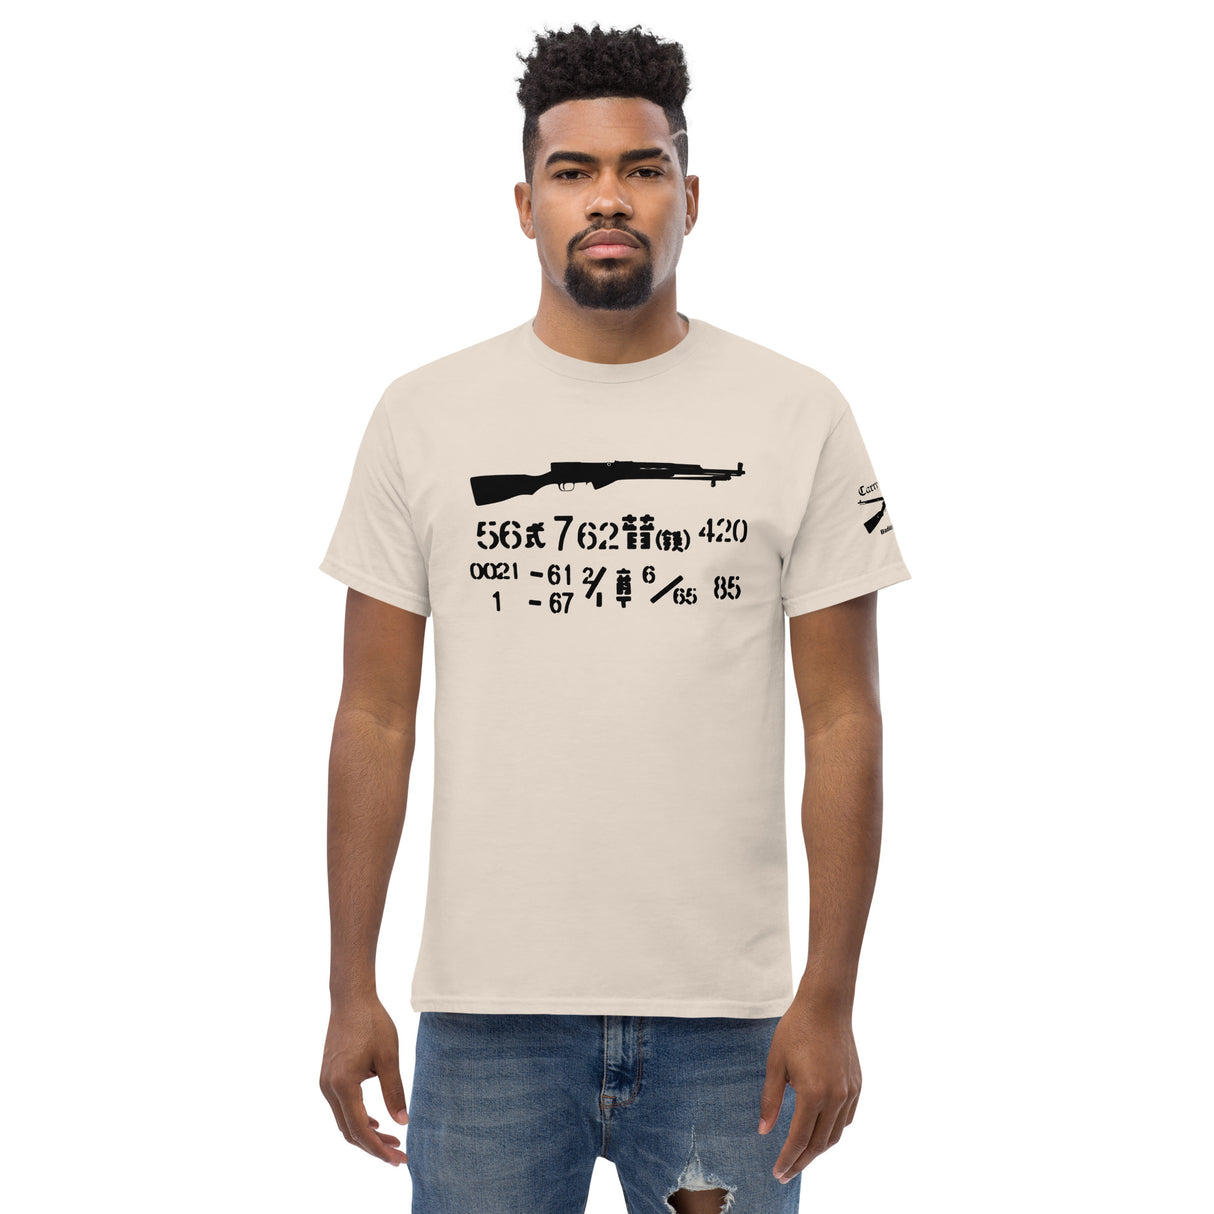 Type 56 SKS Chinese carbine cotton T-shirt with ammo spam can labels - dark font